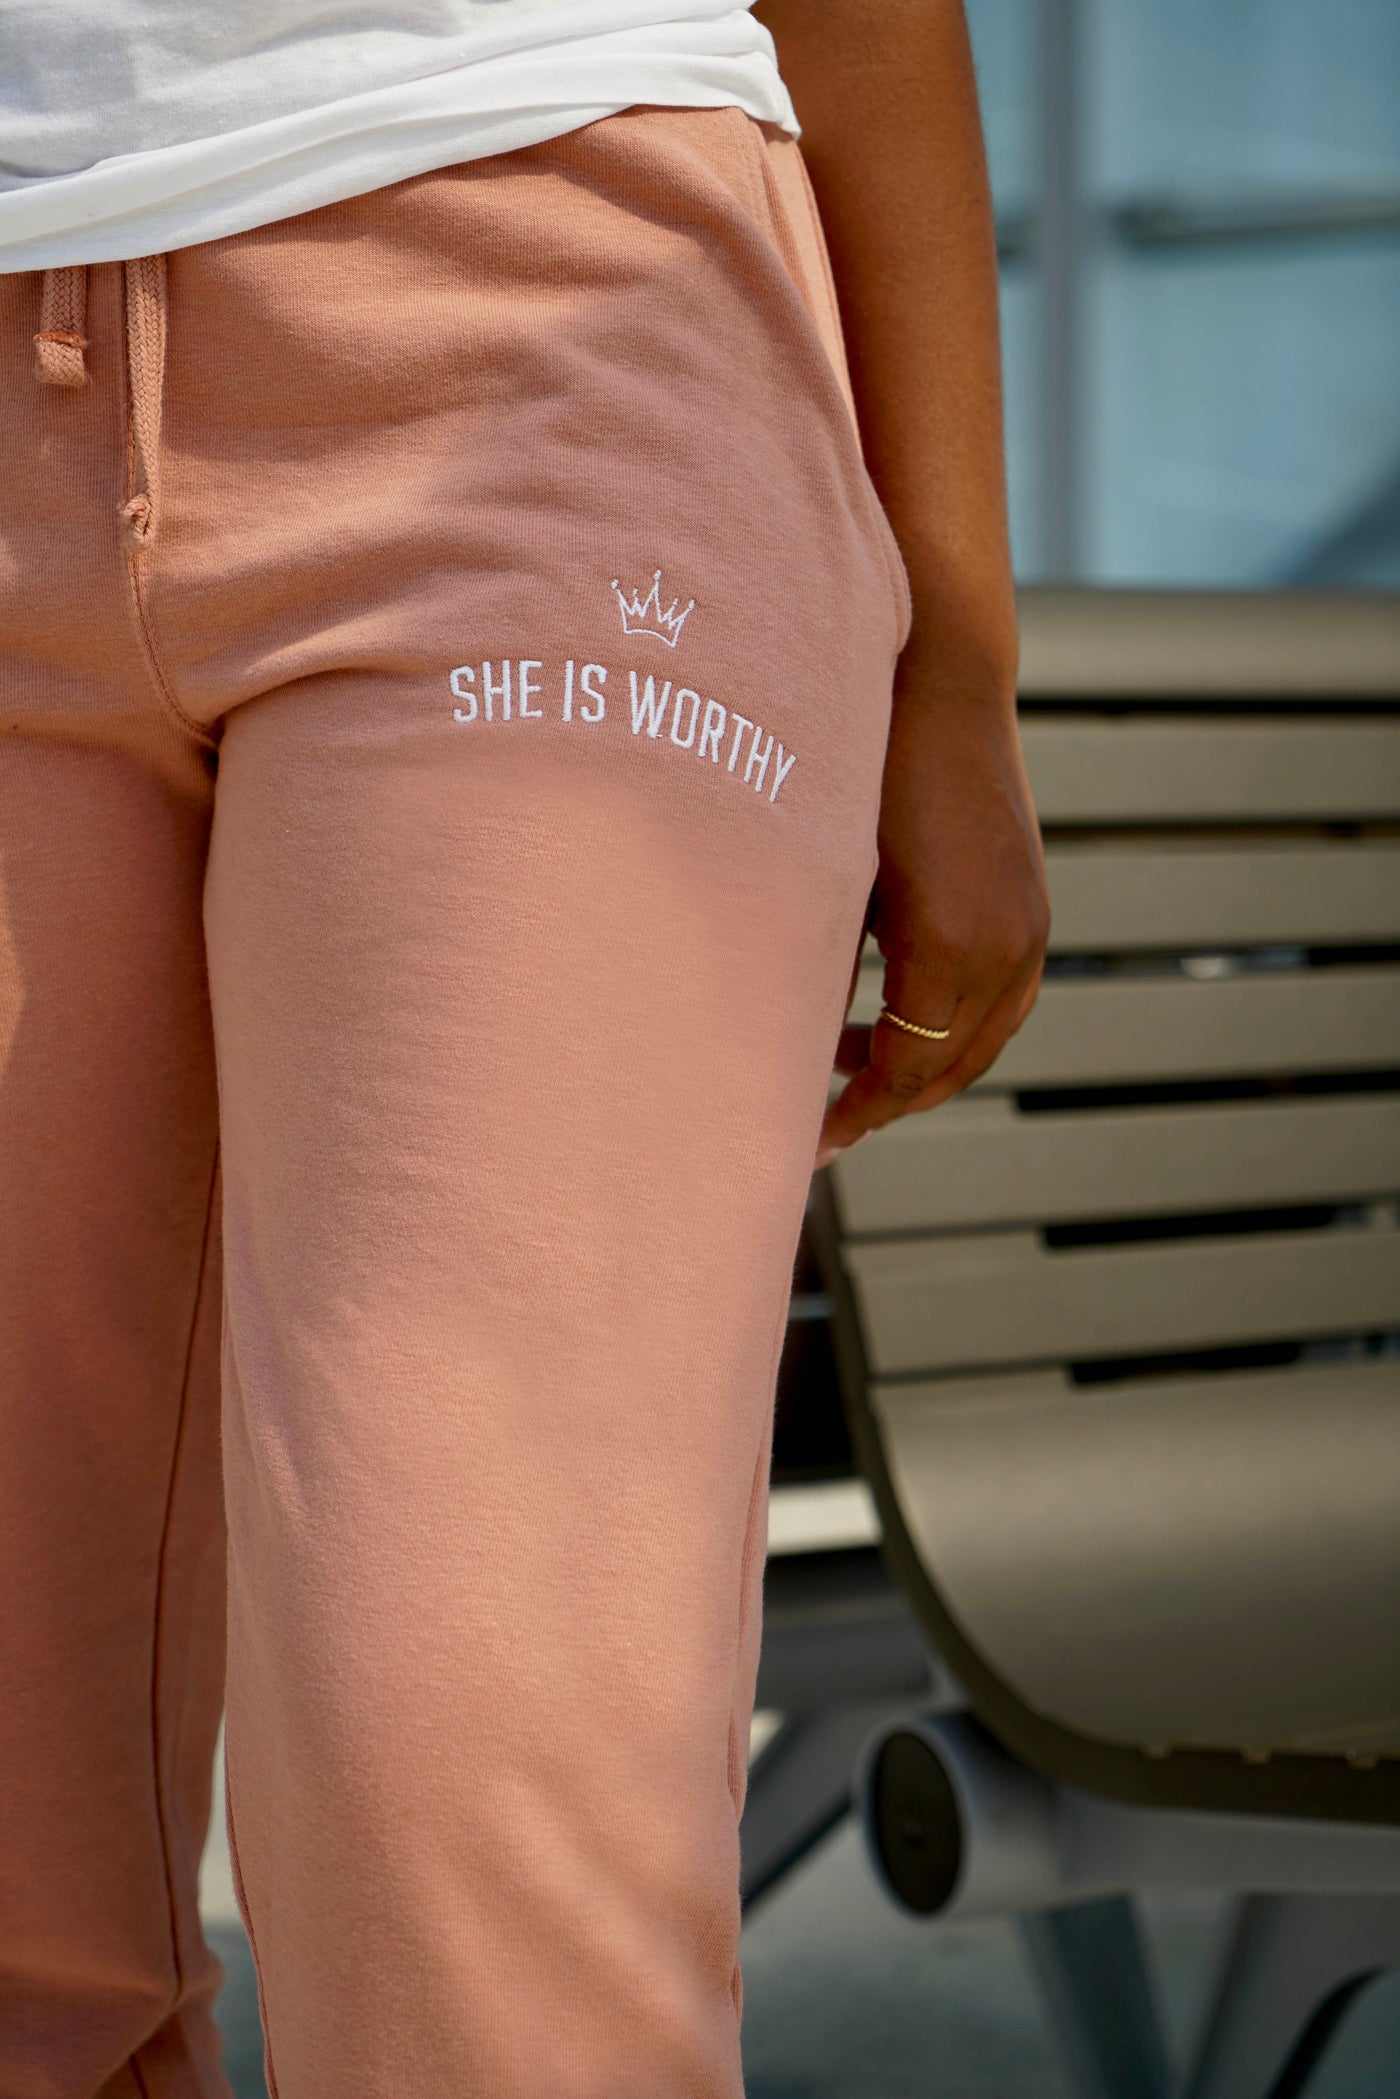 she is worthy joggers proverbs 31 by army of god attire christian clothing